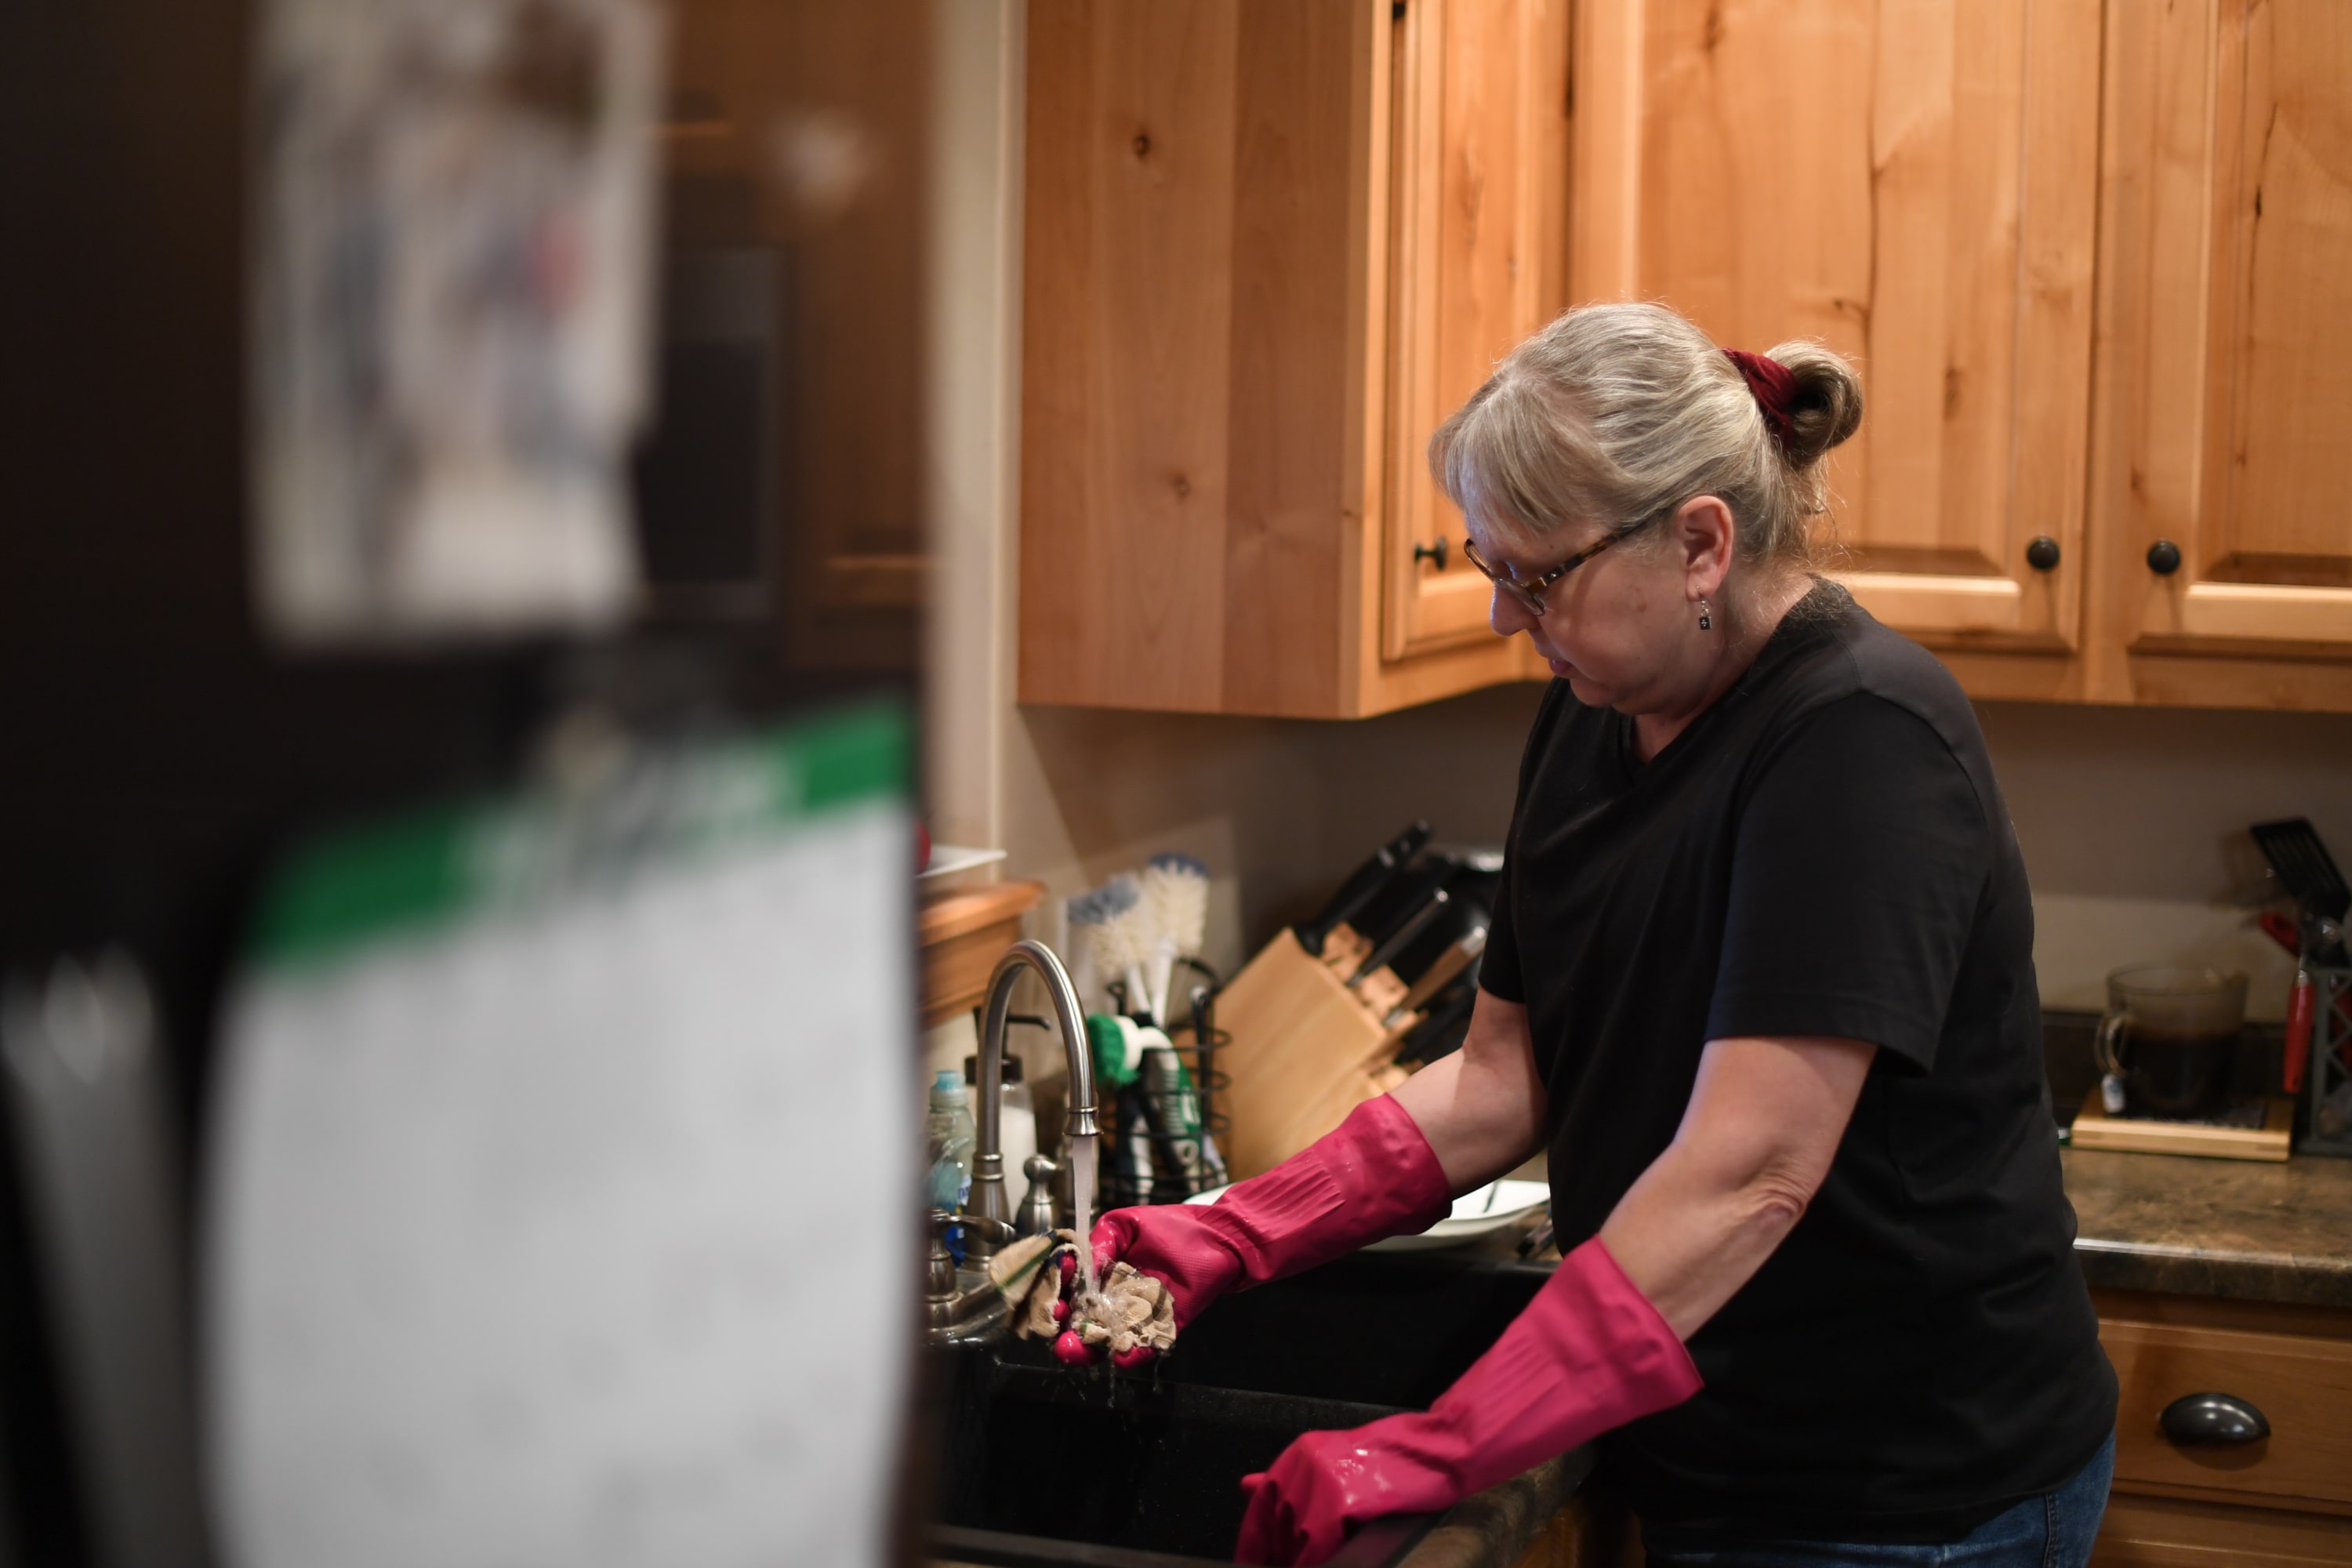 A woman in a black tee shirt with her hair tied back wears red kitchen gloves and stands with her hands in the kitchen sink.